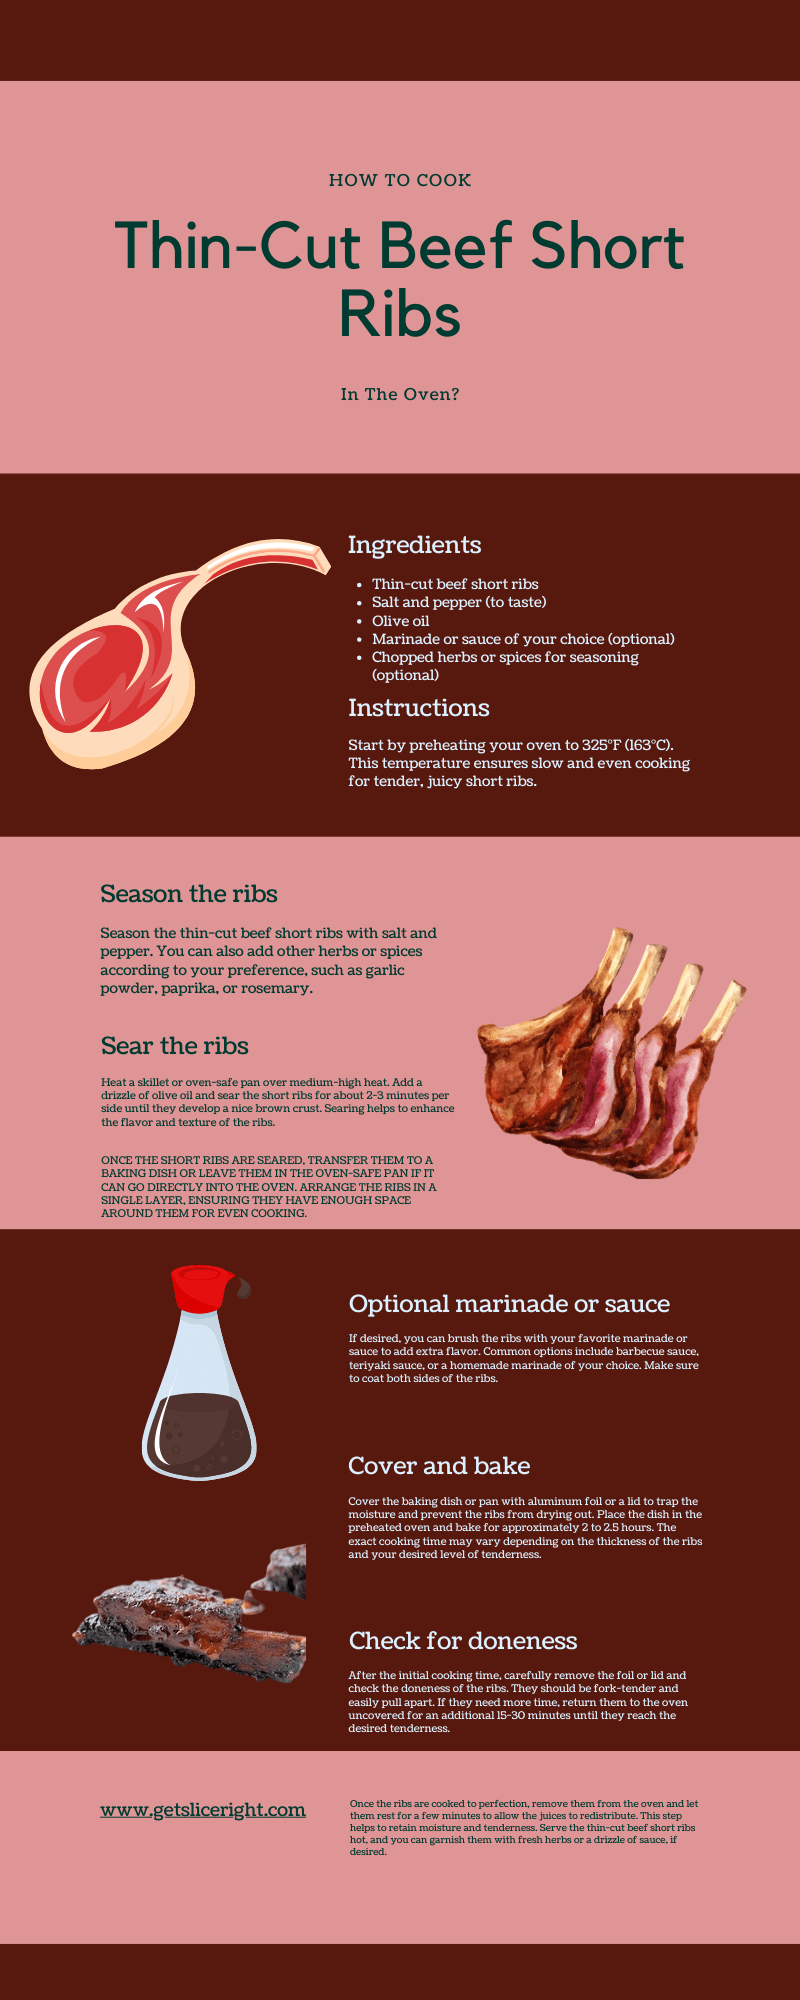 How to cook thin-cut beef short ribs in the oven - infographics